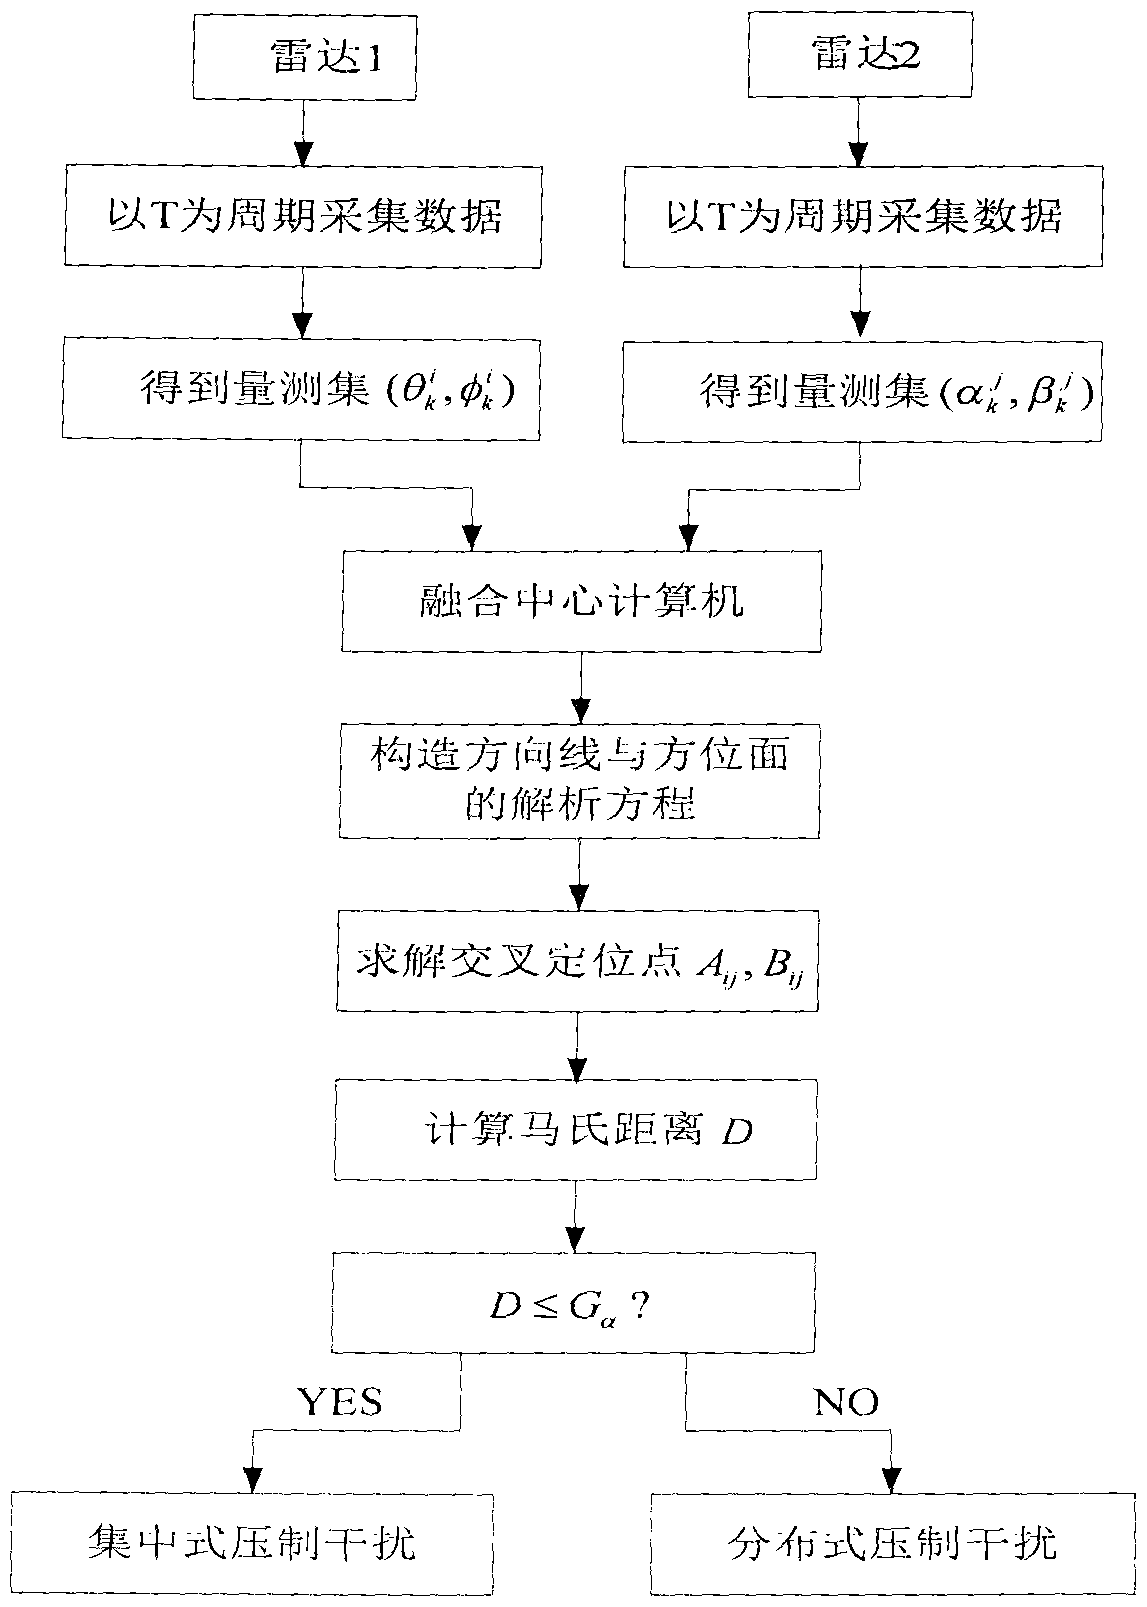 Centralized and Distributed Suppression Interference Discrimination Method Based on Cross-location Point Correlation in Three-coordinate Radar Network